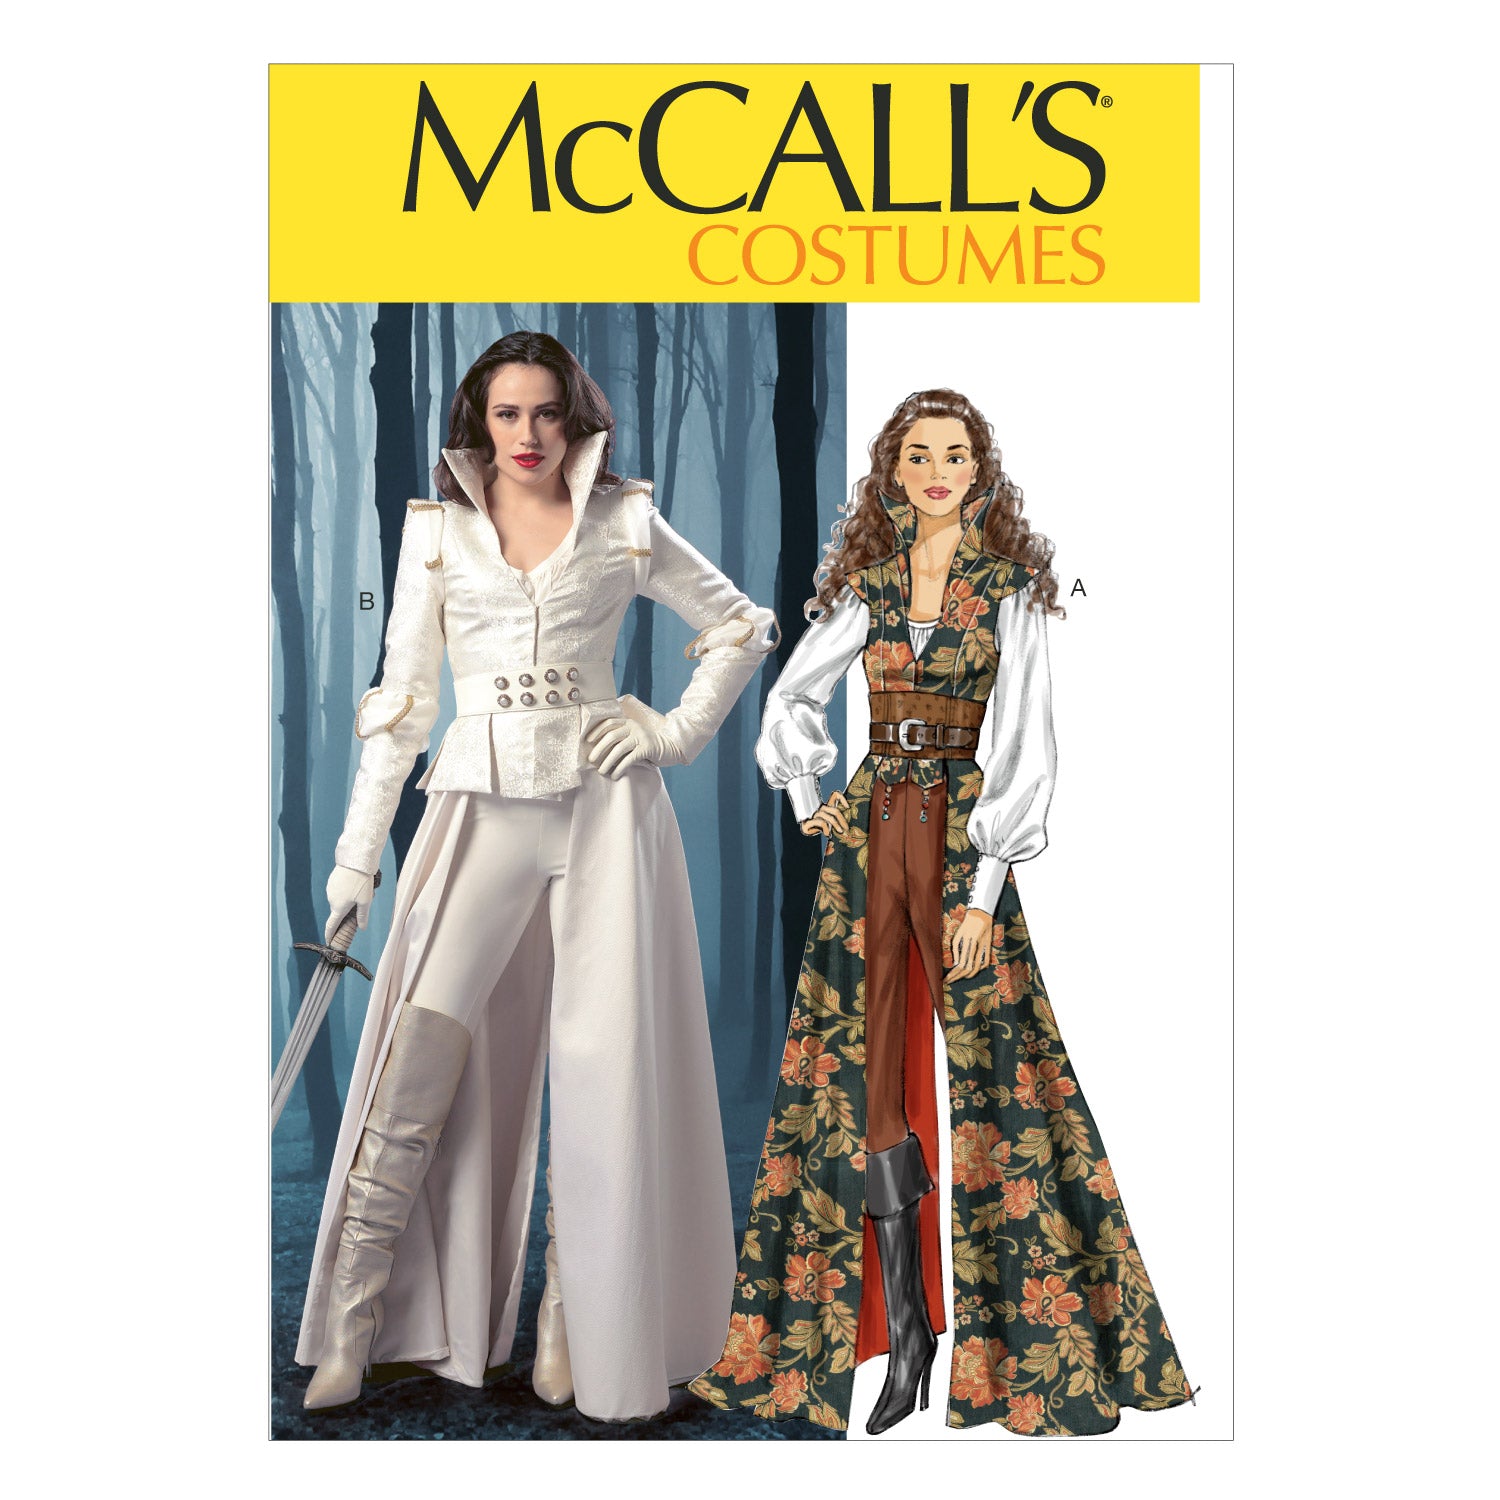 McCall's 6819 Misses' Sci-Fi Warrior Costume Pattern from Jaycotts Sewing Supplies